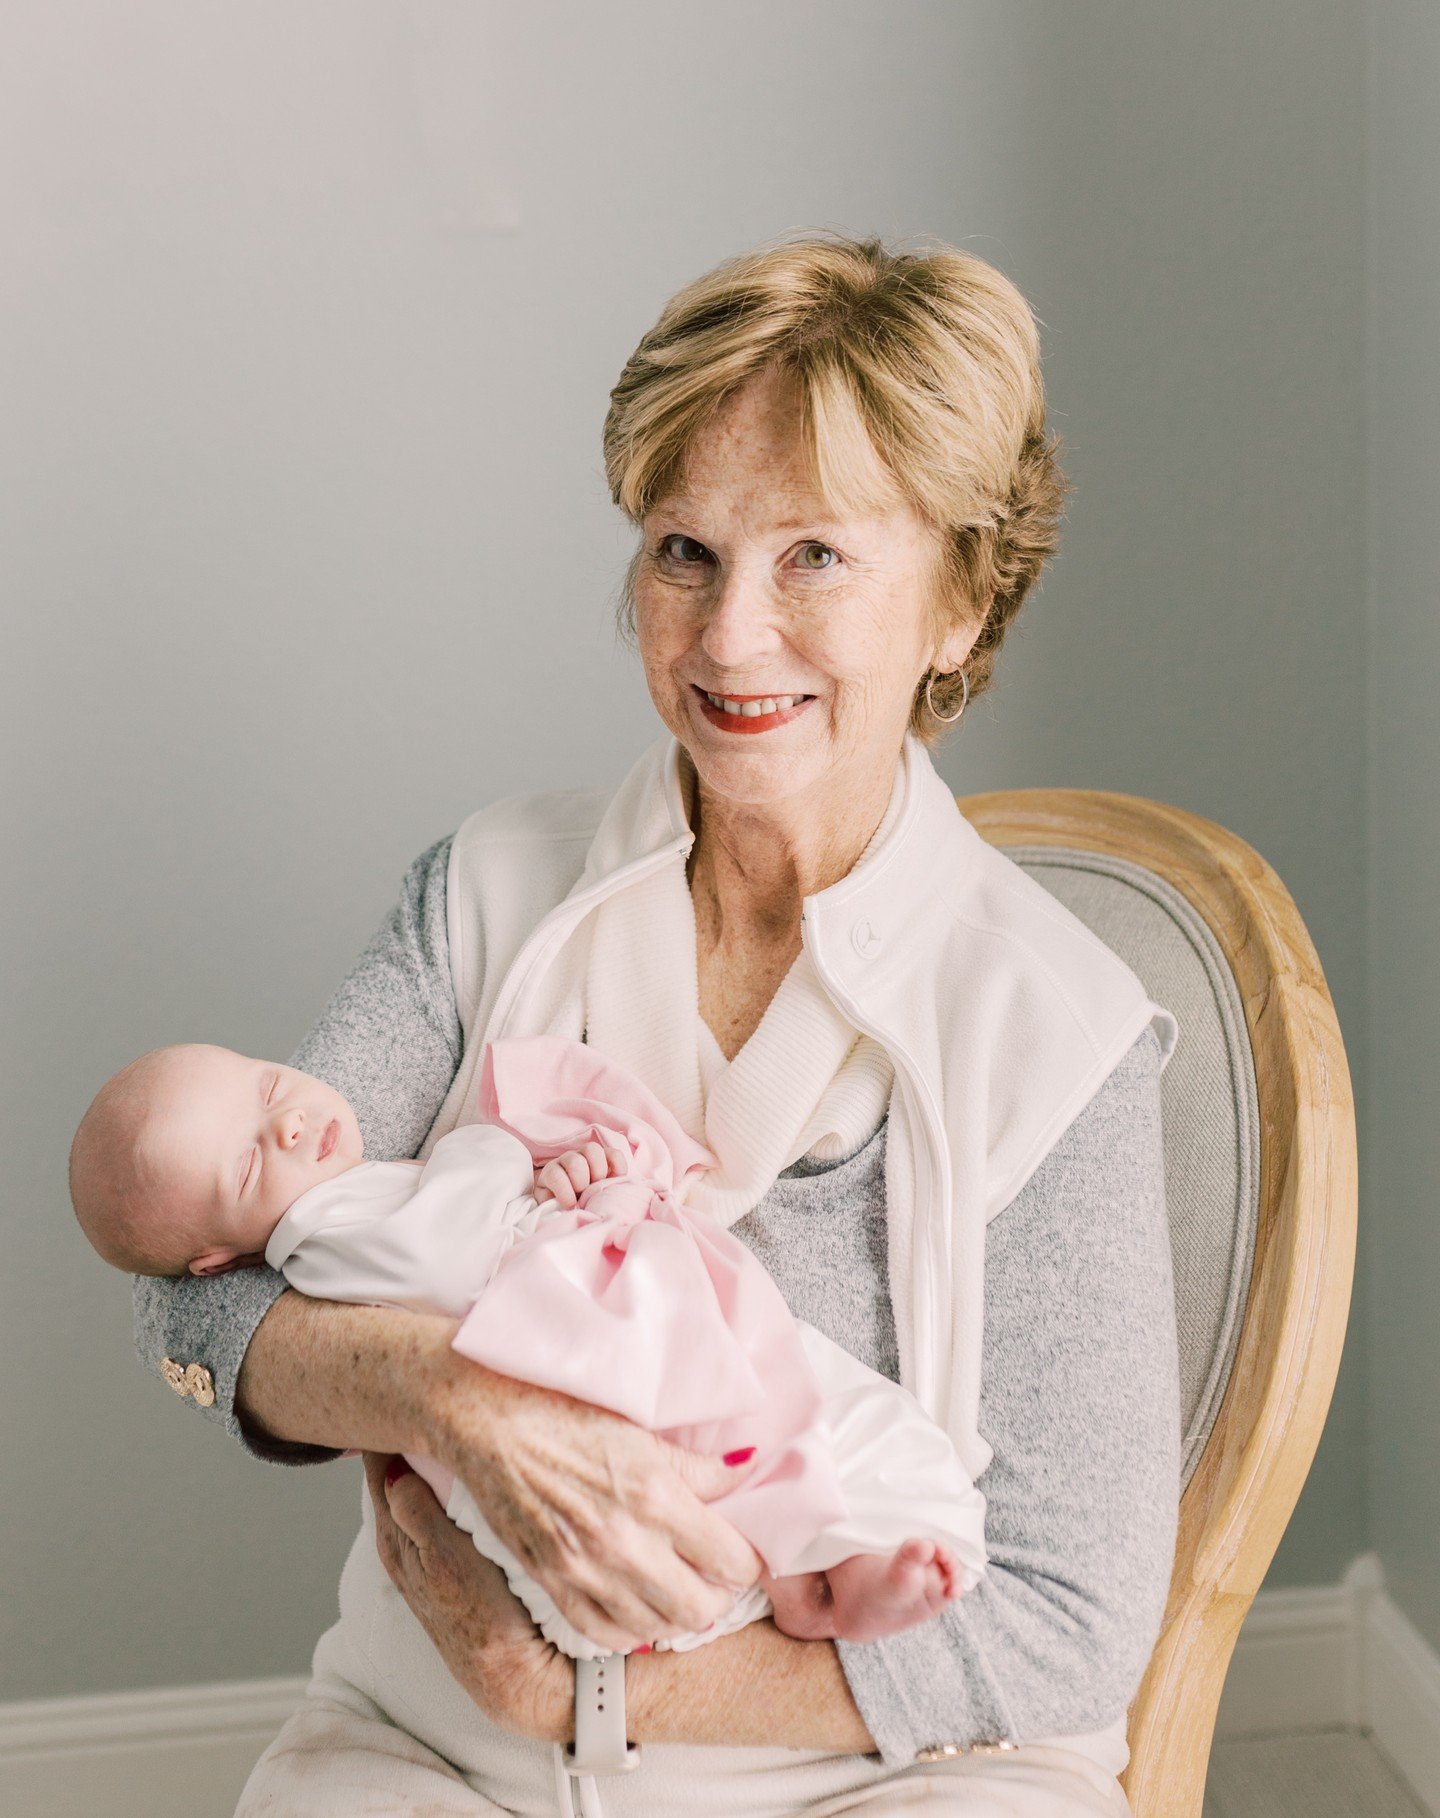 The sweetest thing is seeing the connection between generations. 
.
.
.
.
#carolineeavesphotography #newborn #dallasnewbornphotographer #dfwnewbornphotographer #etxnewbornphotographer #babygirl #myarchetype